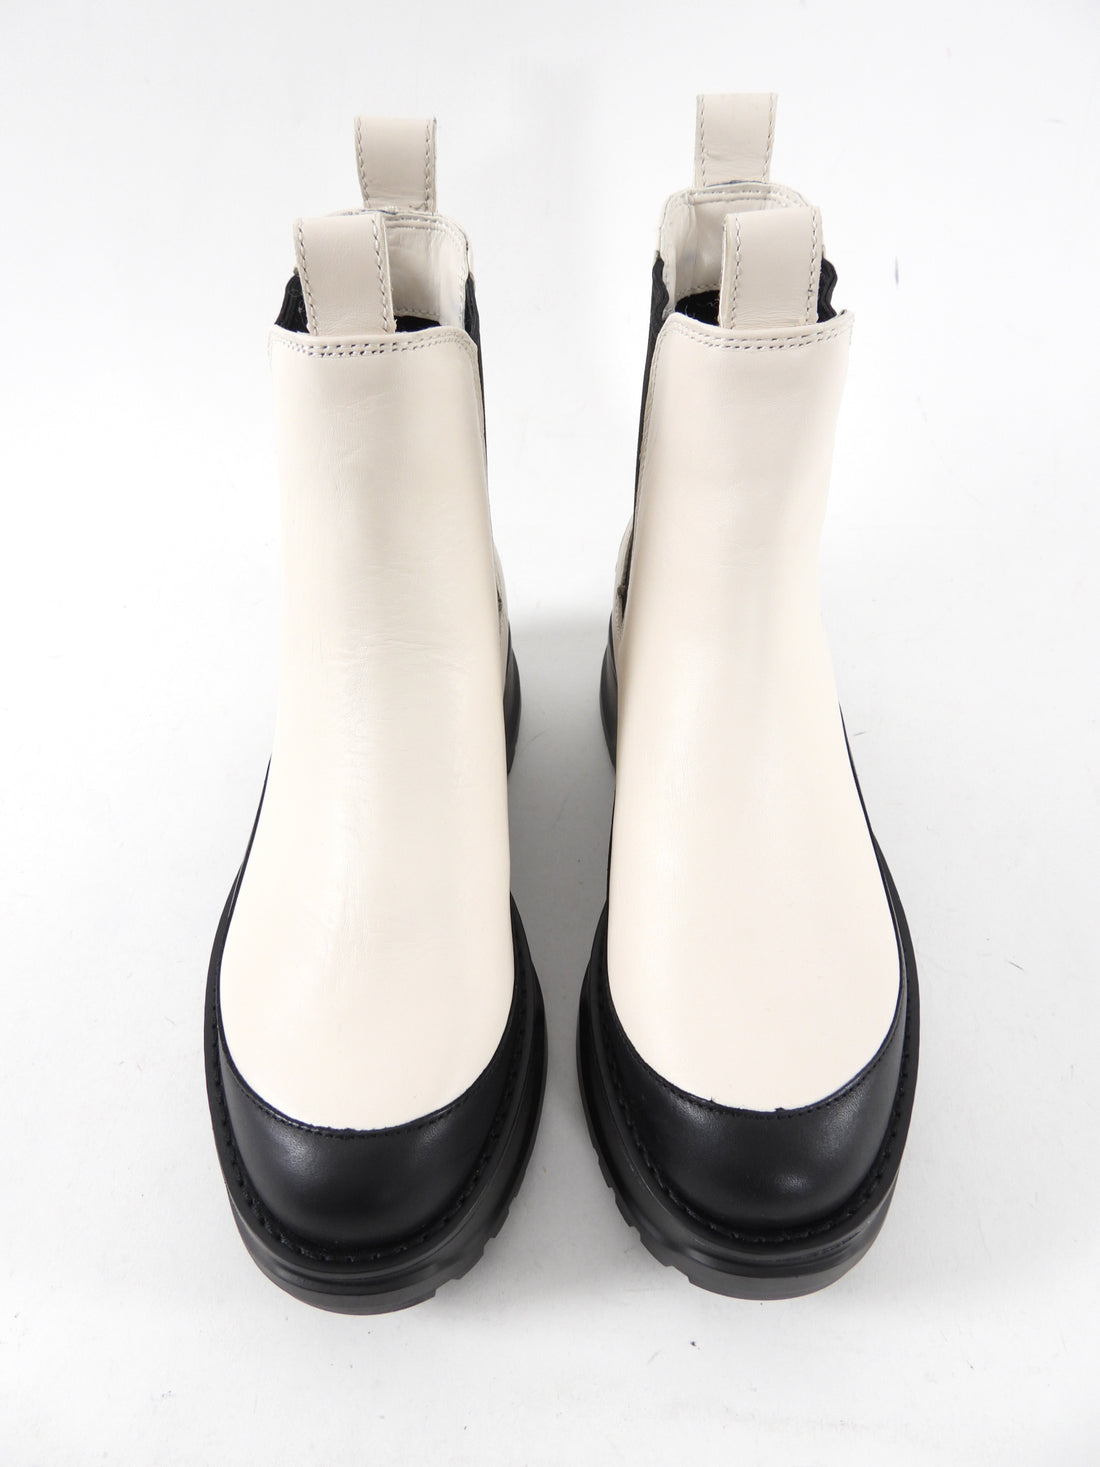 Michael Kors Dupree Ivory and Black Sole Ankle Boot - 7.5M